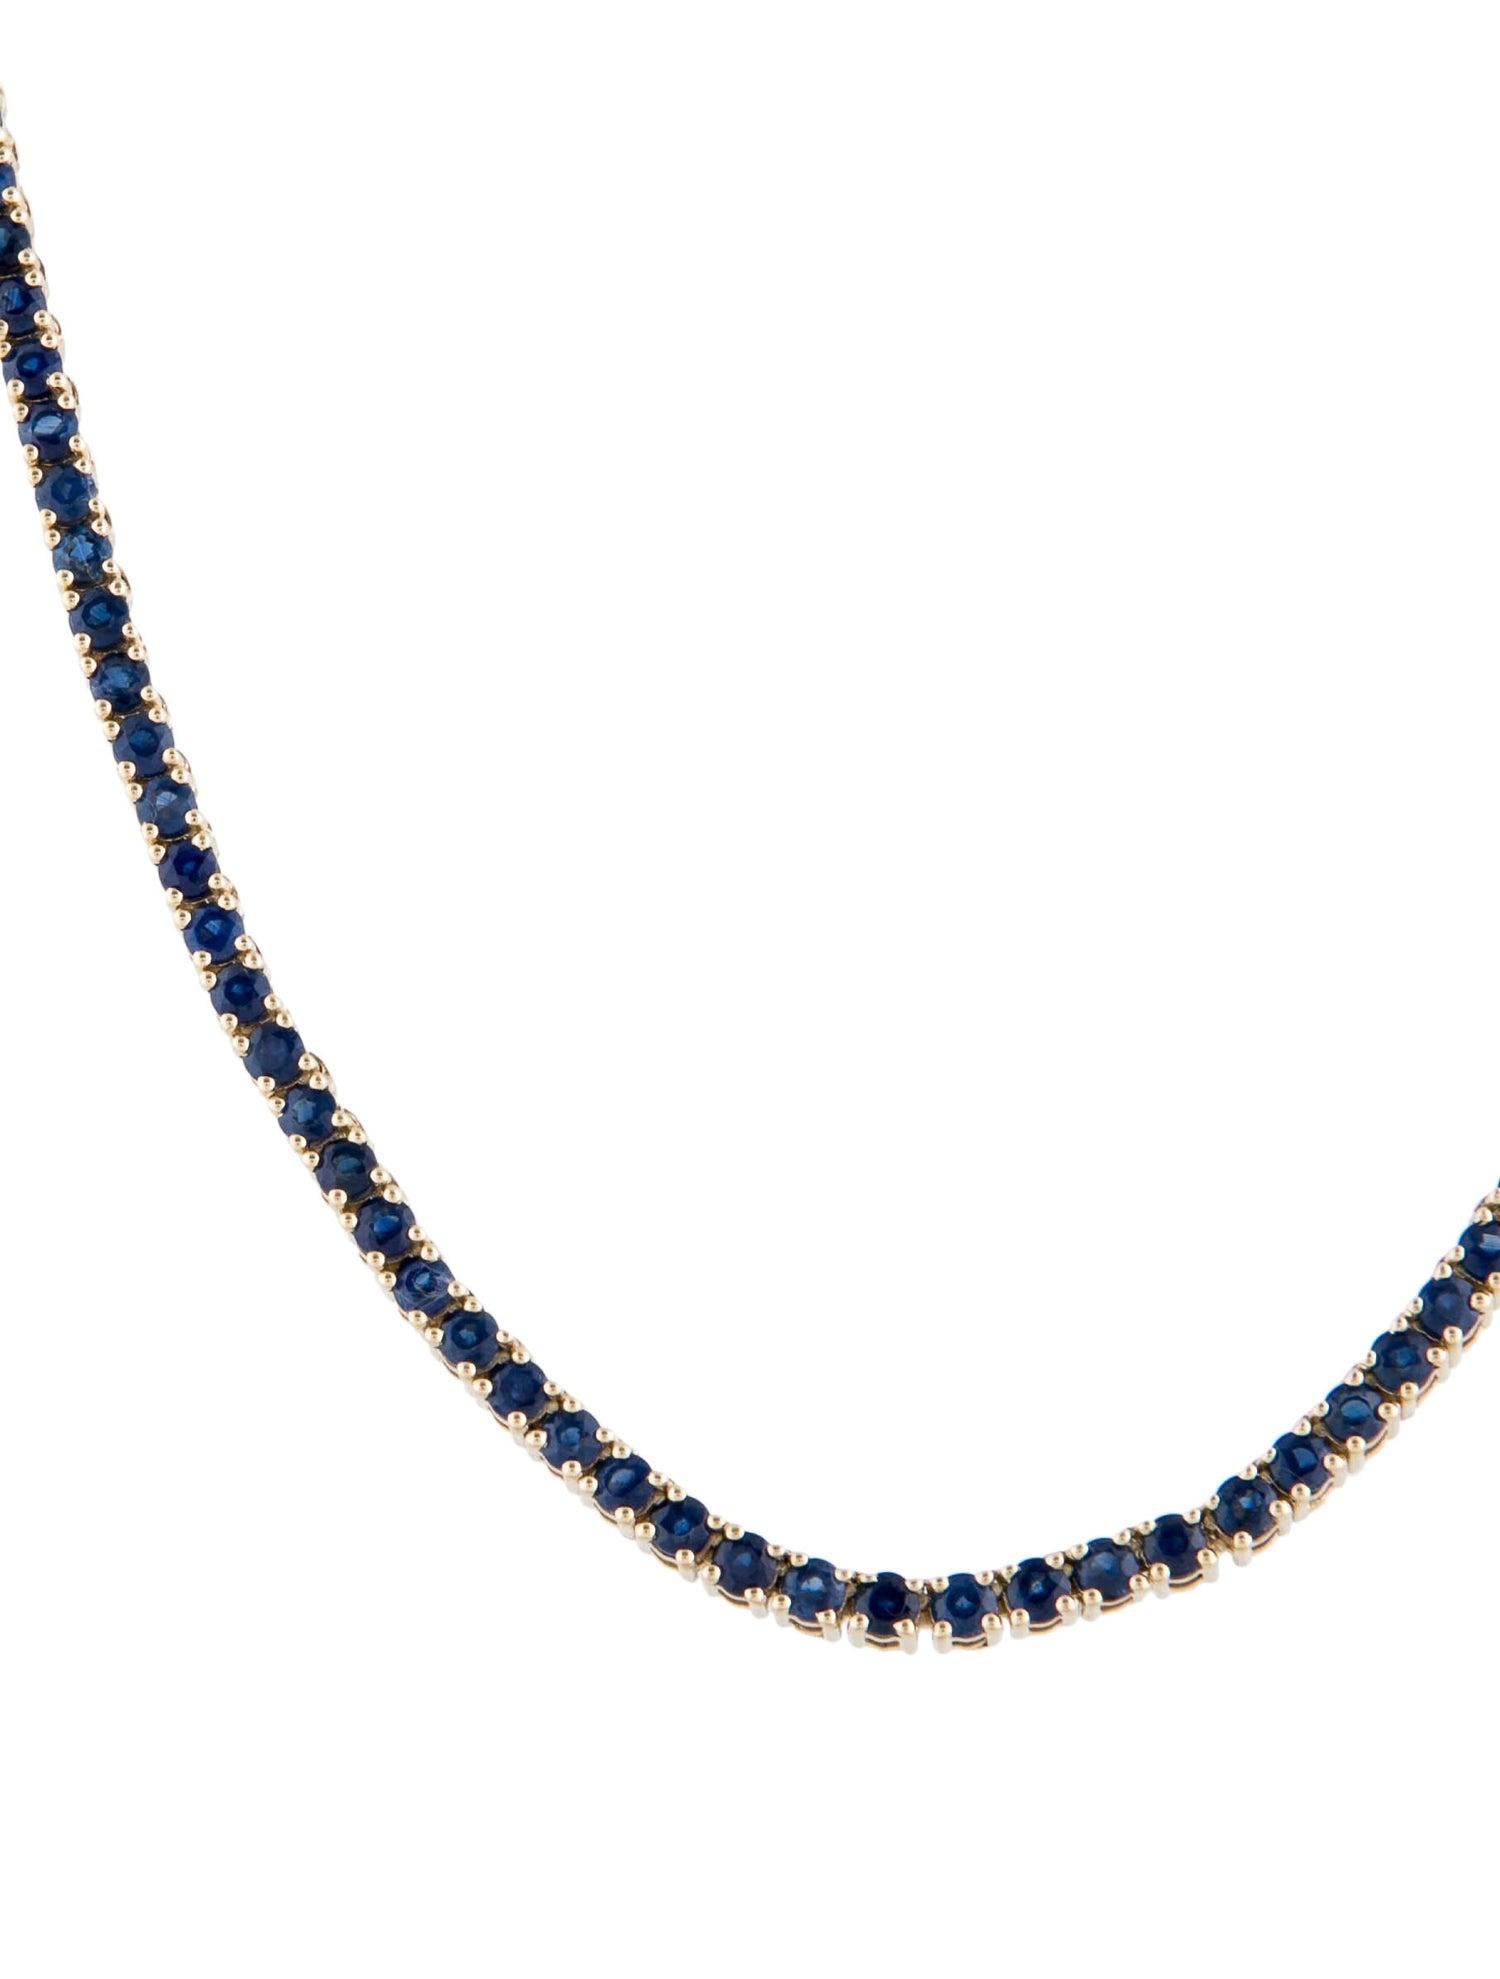 Brilliant Cut 14K Sapphire Chain Necklace 7.03ctw  Stunning Jewelry Piece for Elegance For Sale